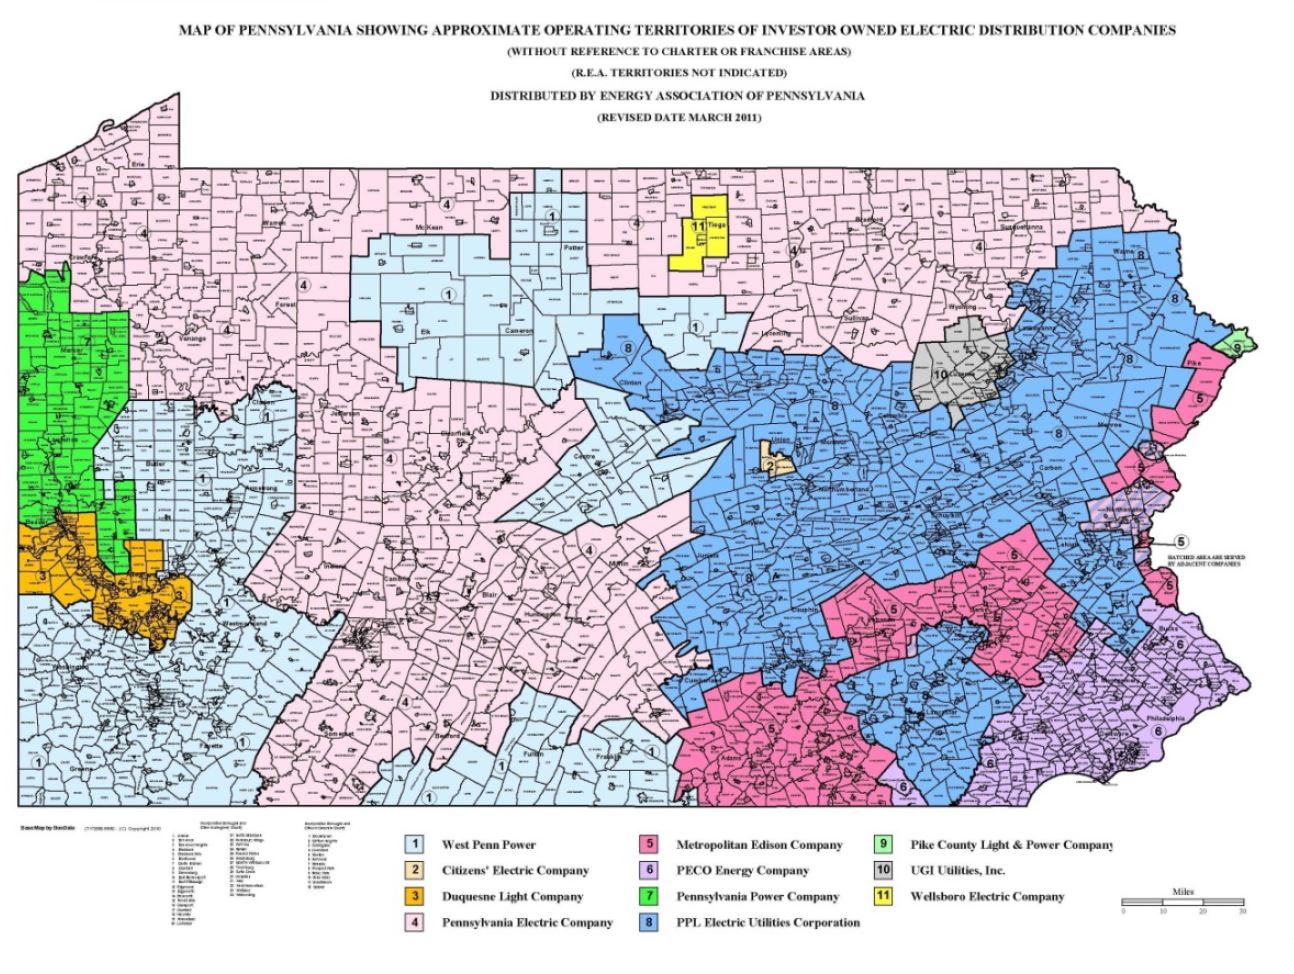 PA Electric Utilities Service Areas, PA PUC Electric Power Outlook Report, 2021